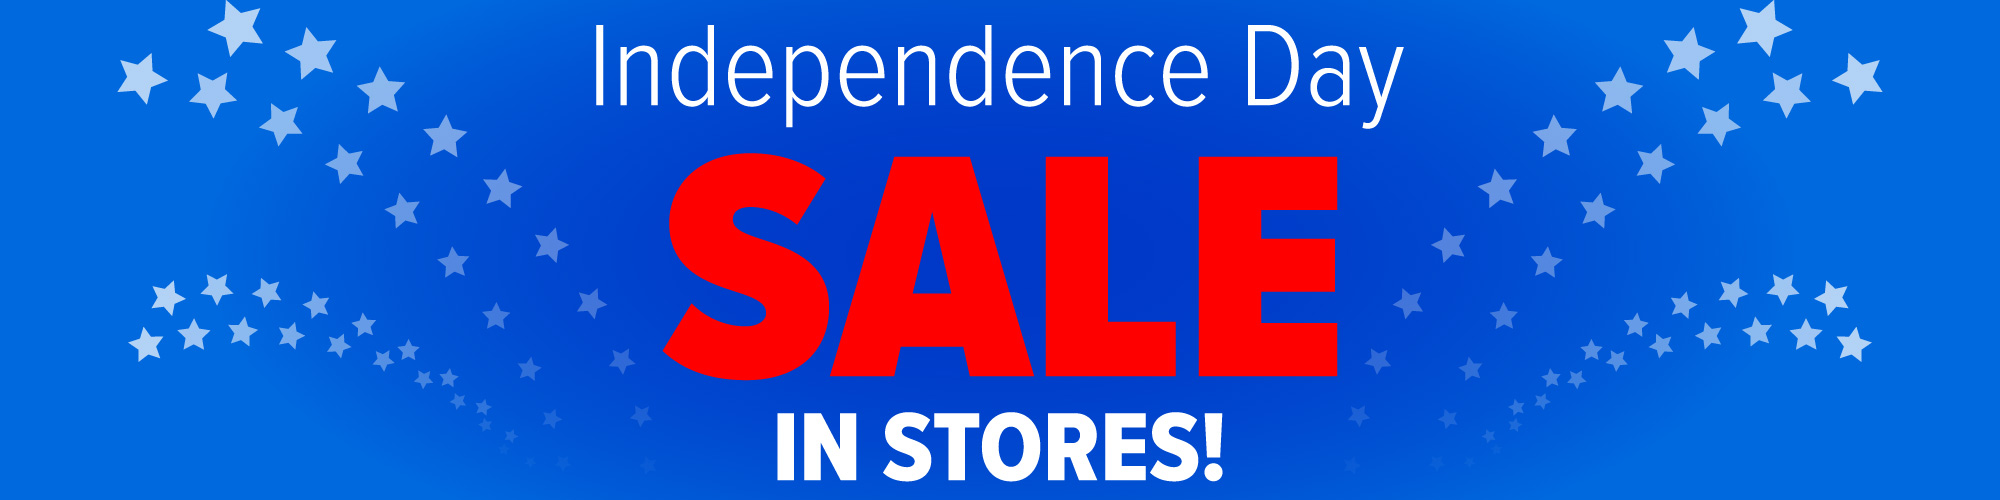 independence day sale